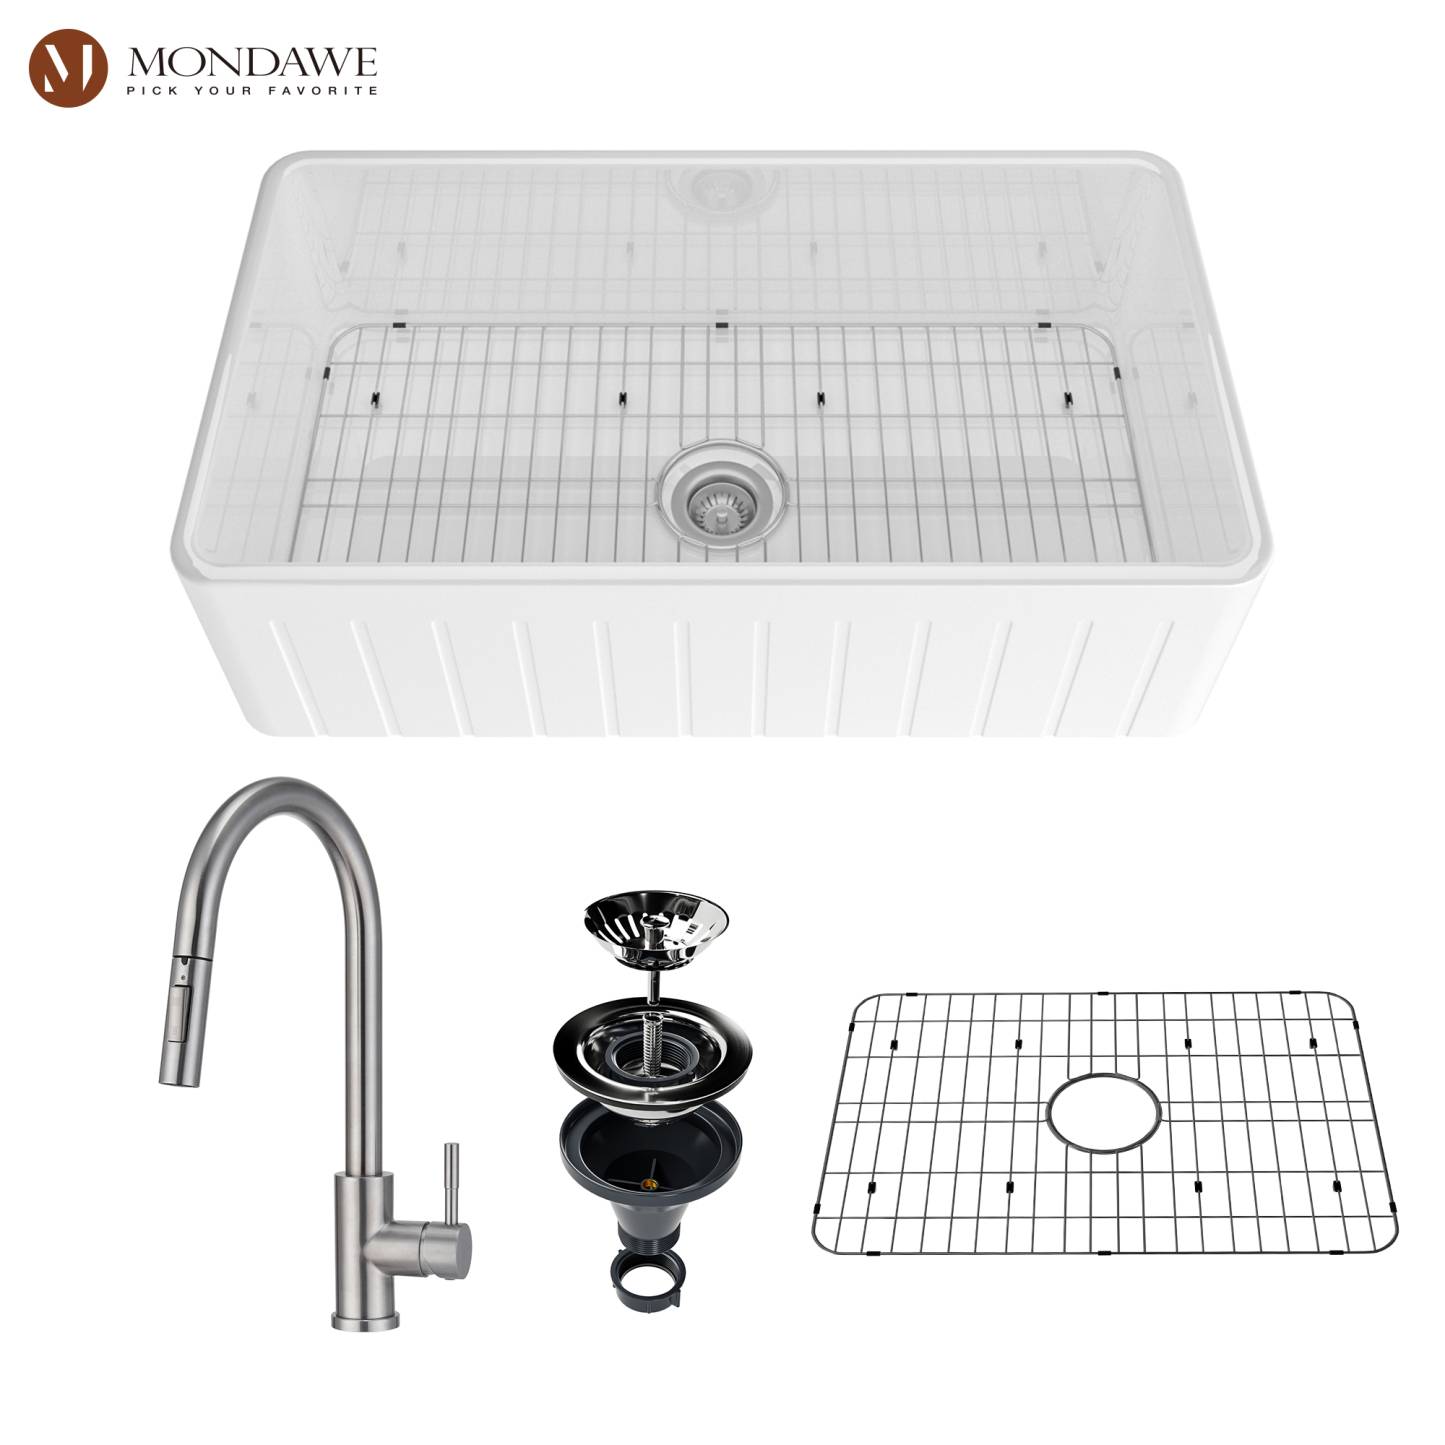 Farmhouse 33 in. single bowl fireclay kitchen sink in white comes with pull-down faucet-Mondawe